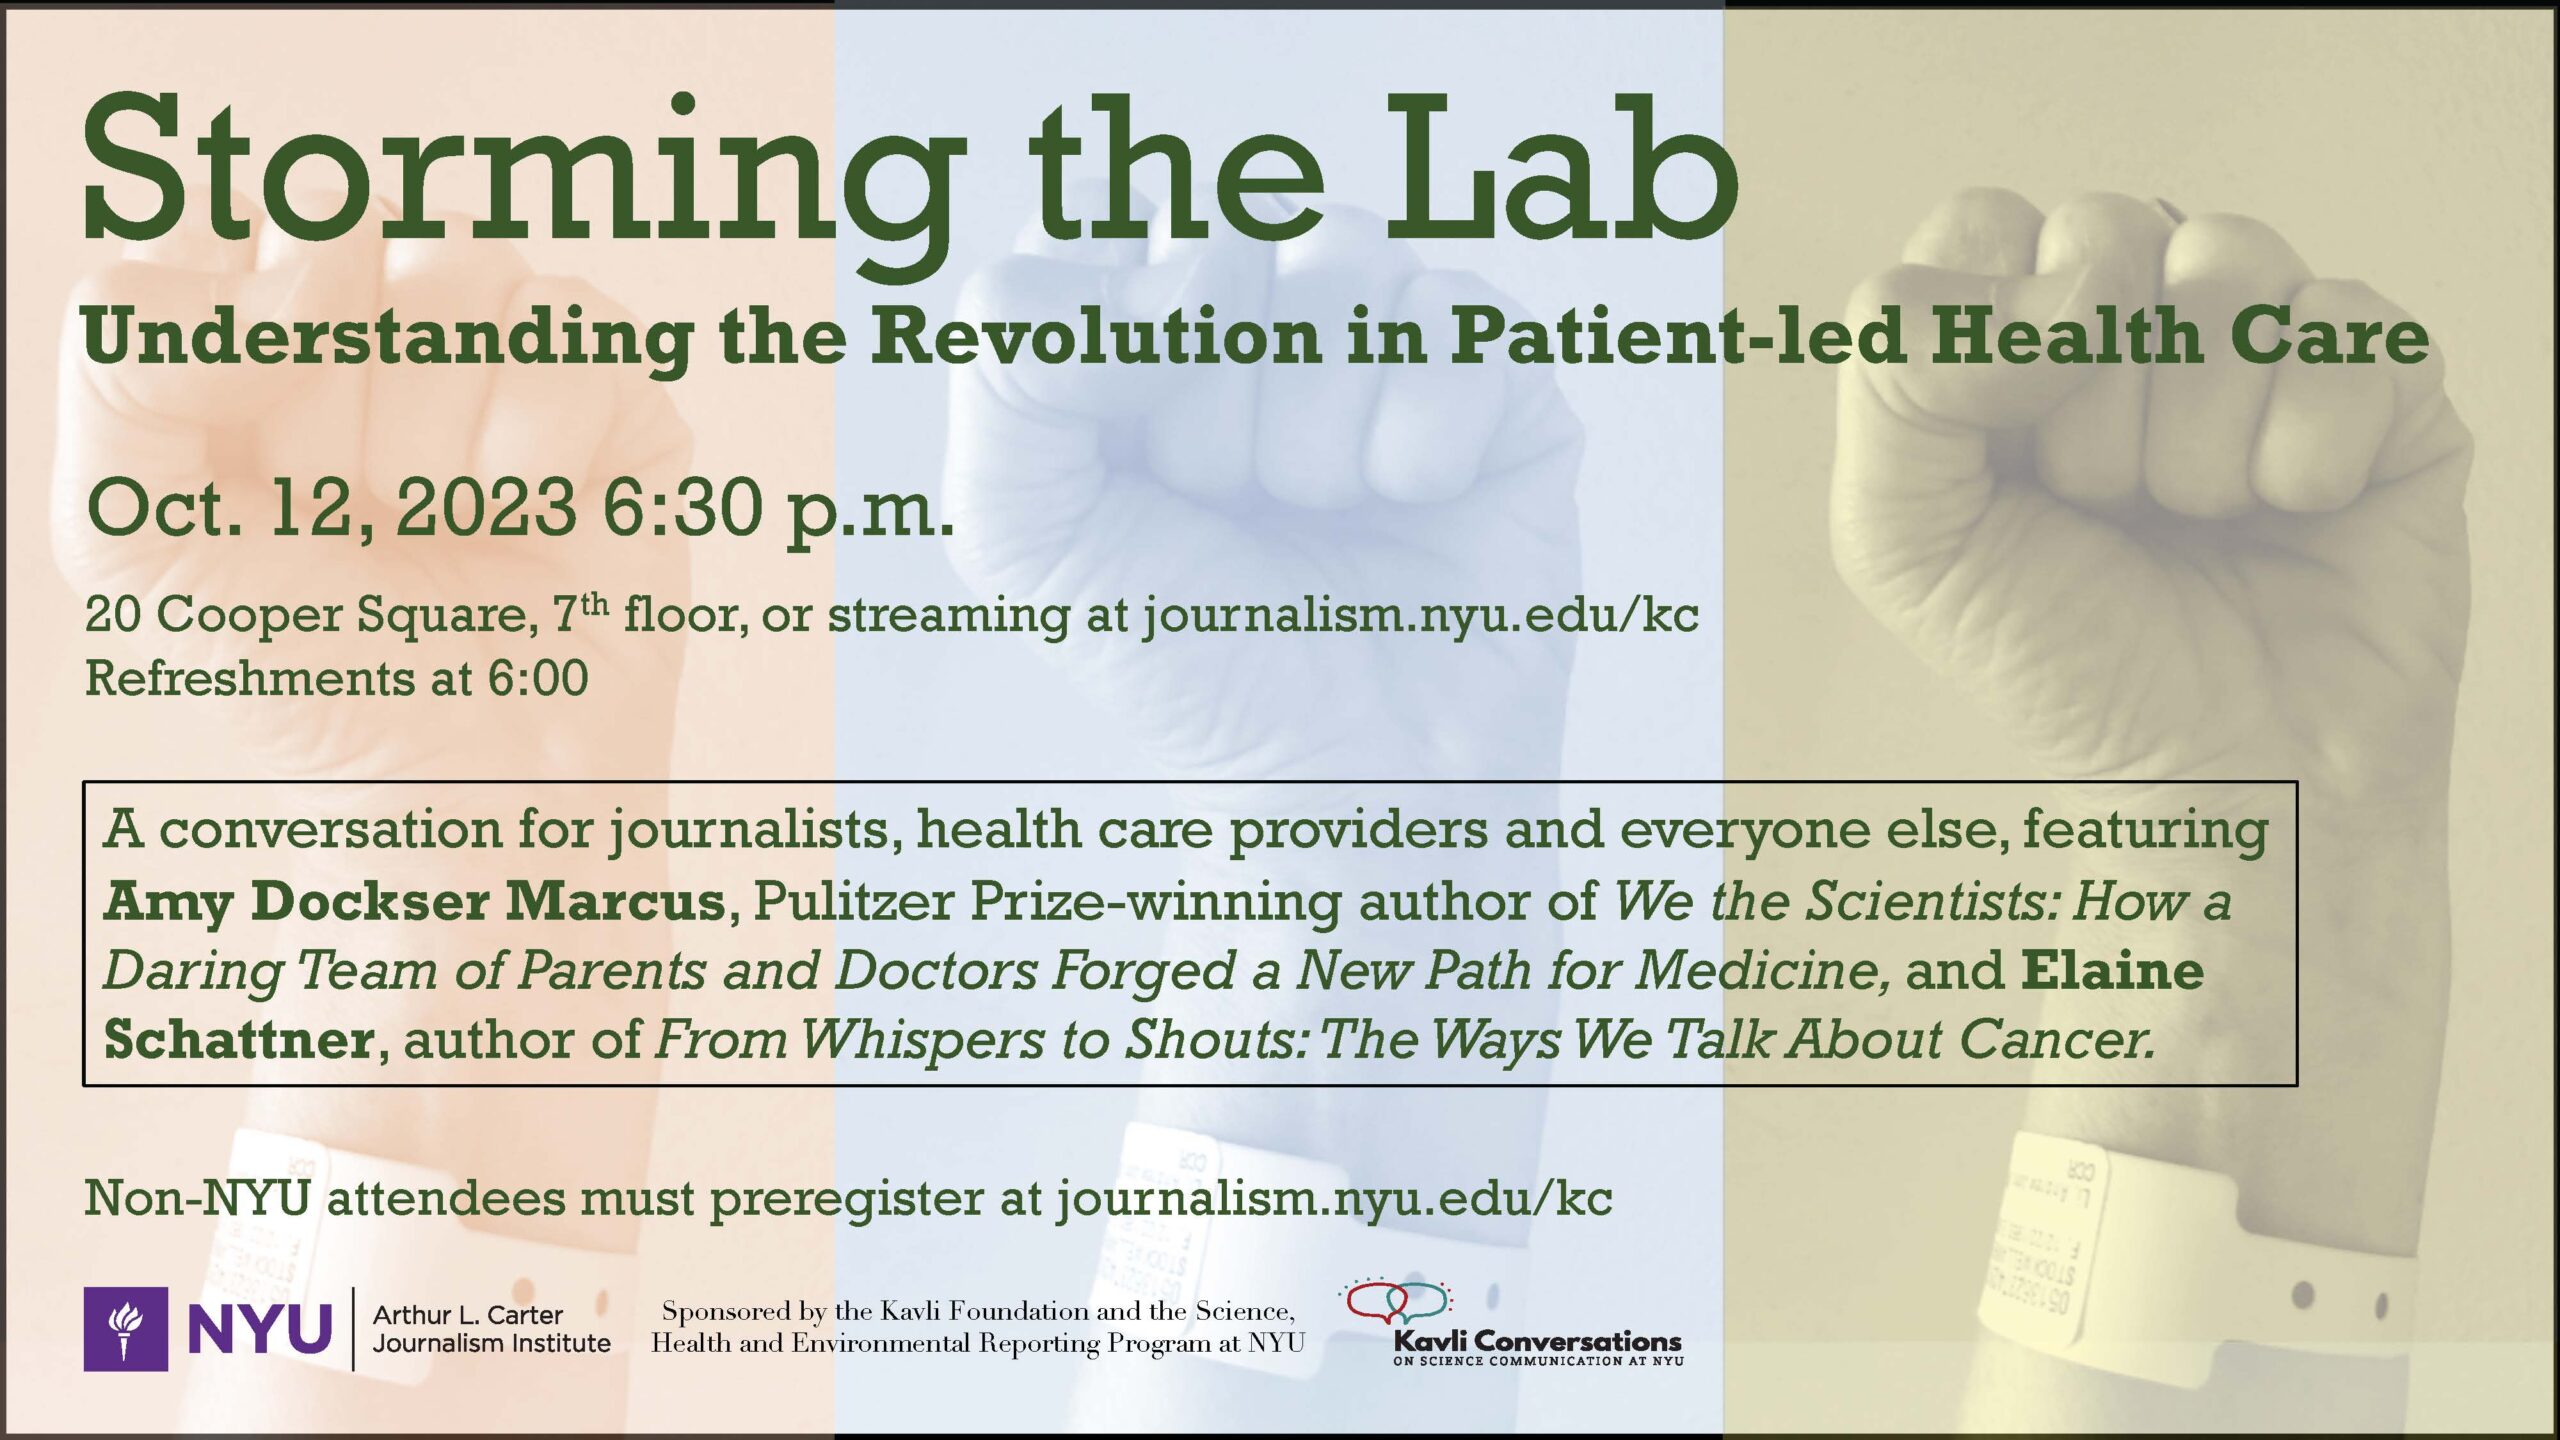 Storming the lab event poster